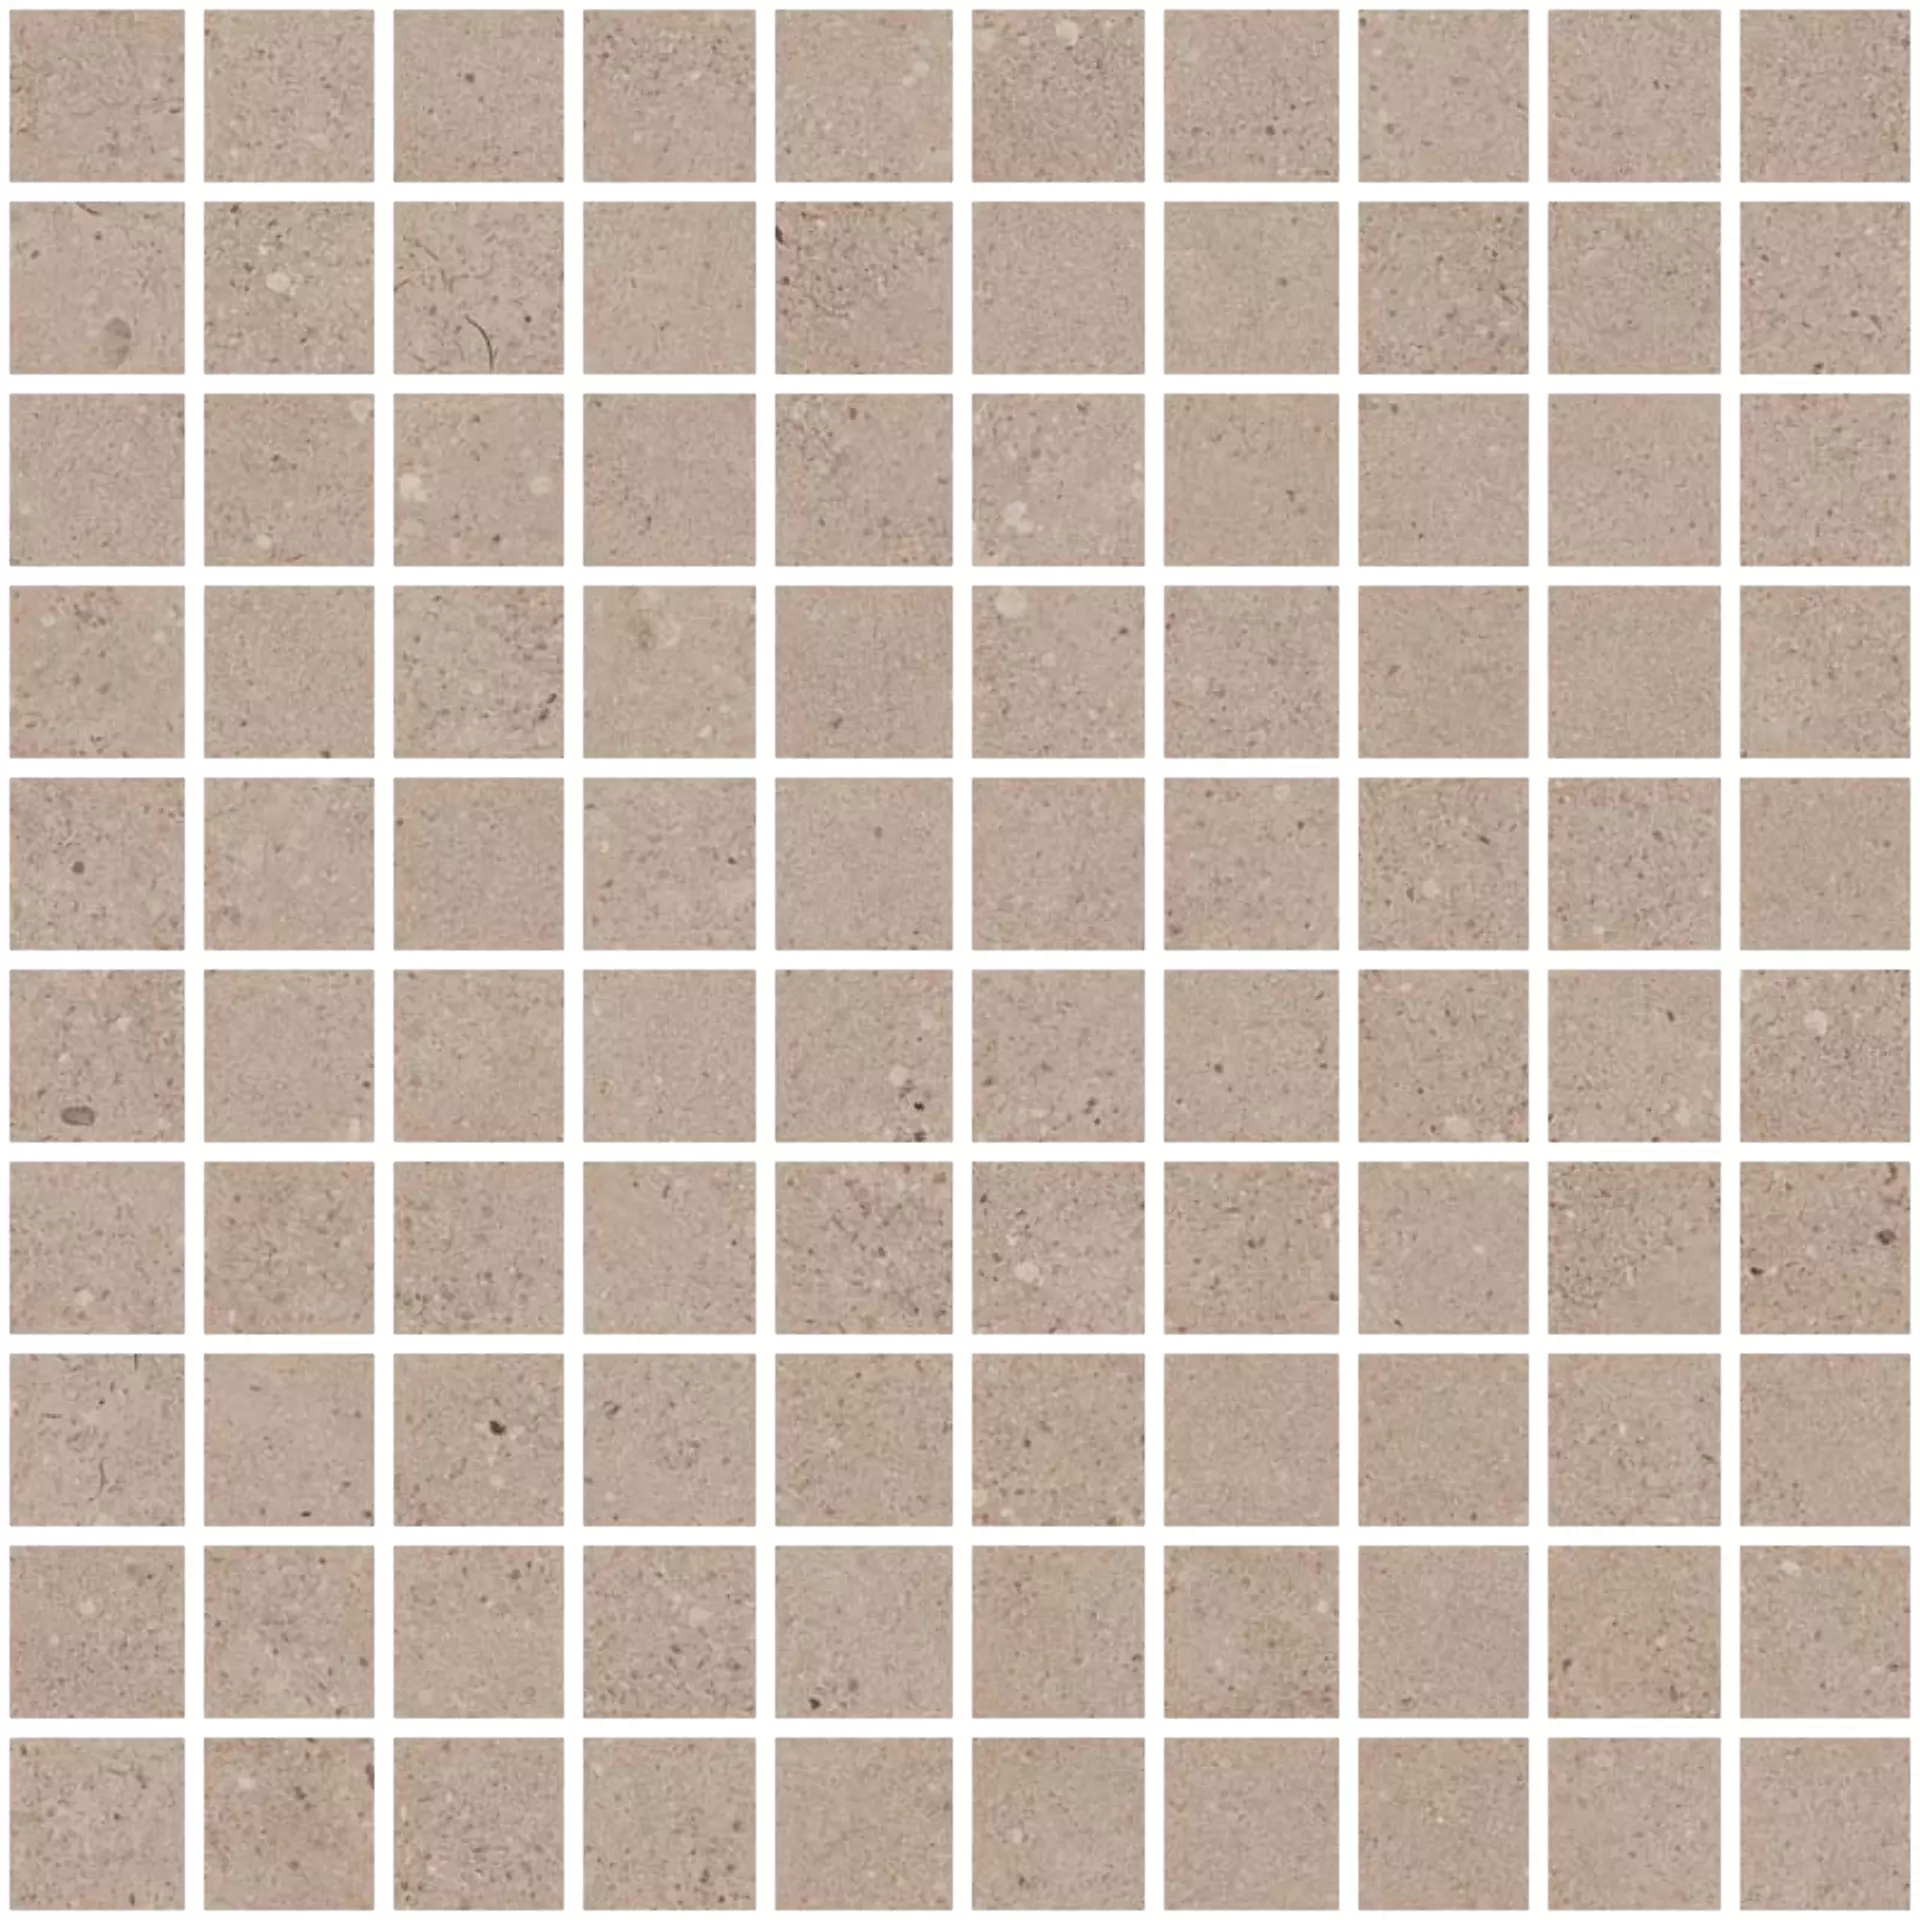 Sant Agostino Silkystone Taupe Natural Mosaic CSAMSLTA30 30x30cm rectified 10mm